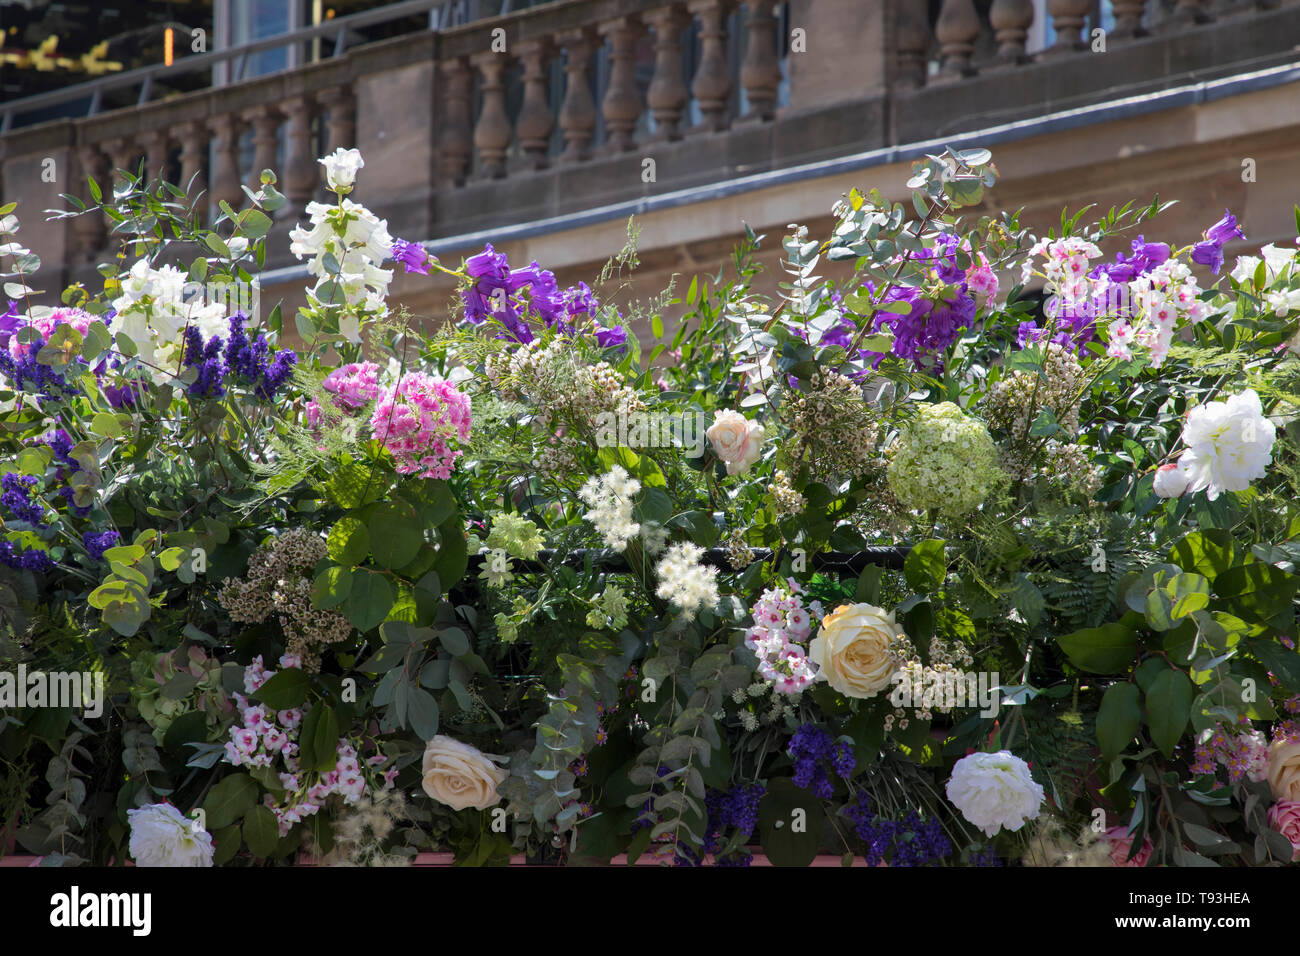 LONDON, UNITED KINGDOM - MAY 15th, 2019: Covent Garden celebrates its heritage as London’s original flower market with elaborated floral installations Stock Photo